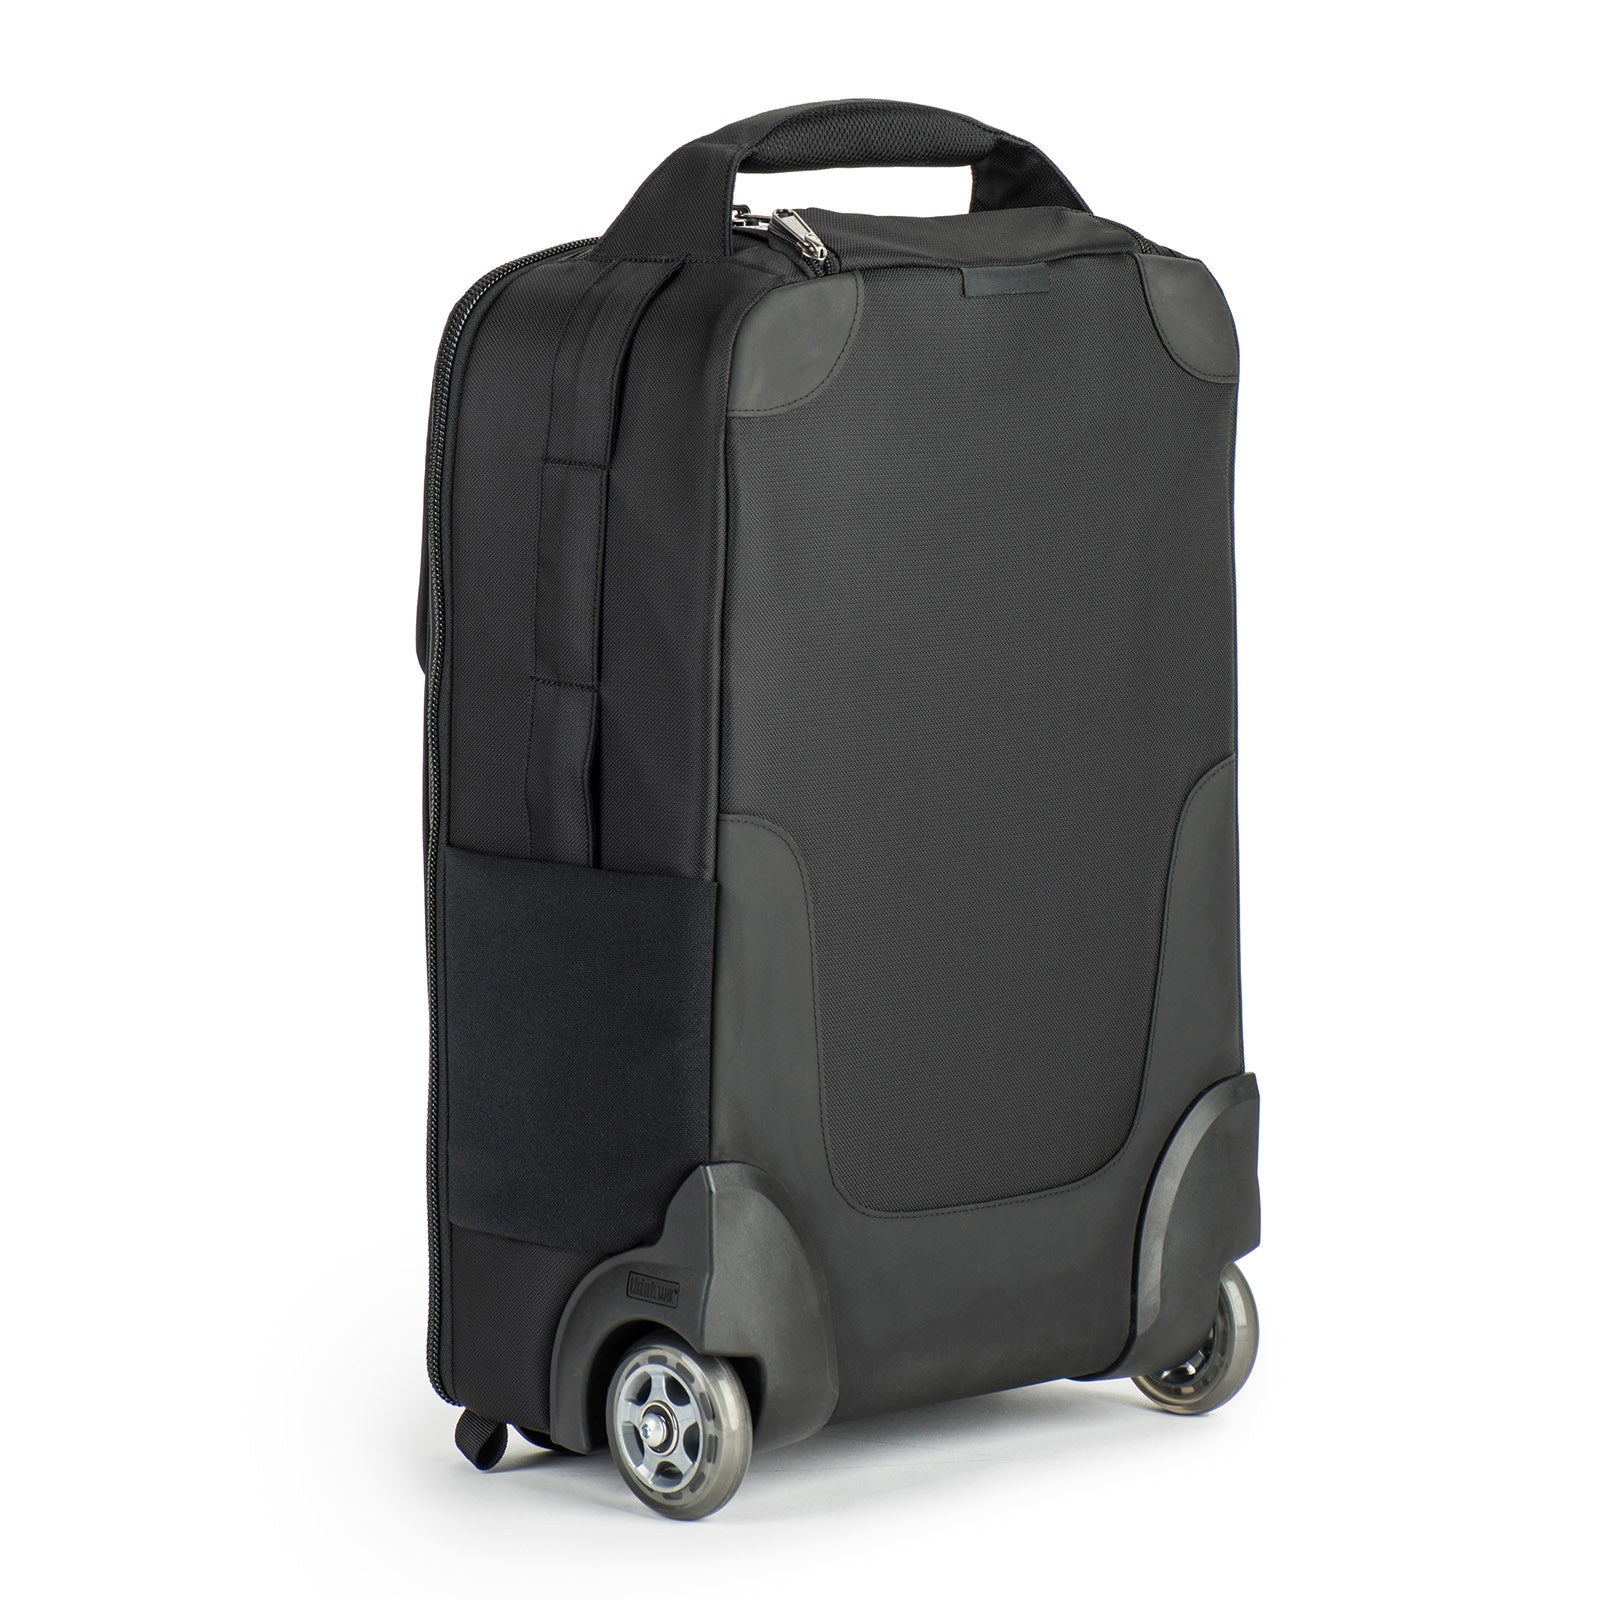 User replaceable retractable handle, wheels, wheel housings, and front foot extends product life